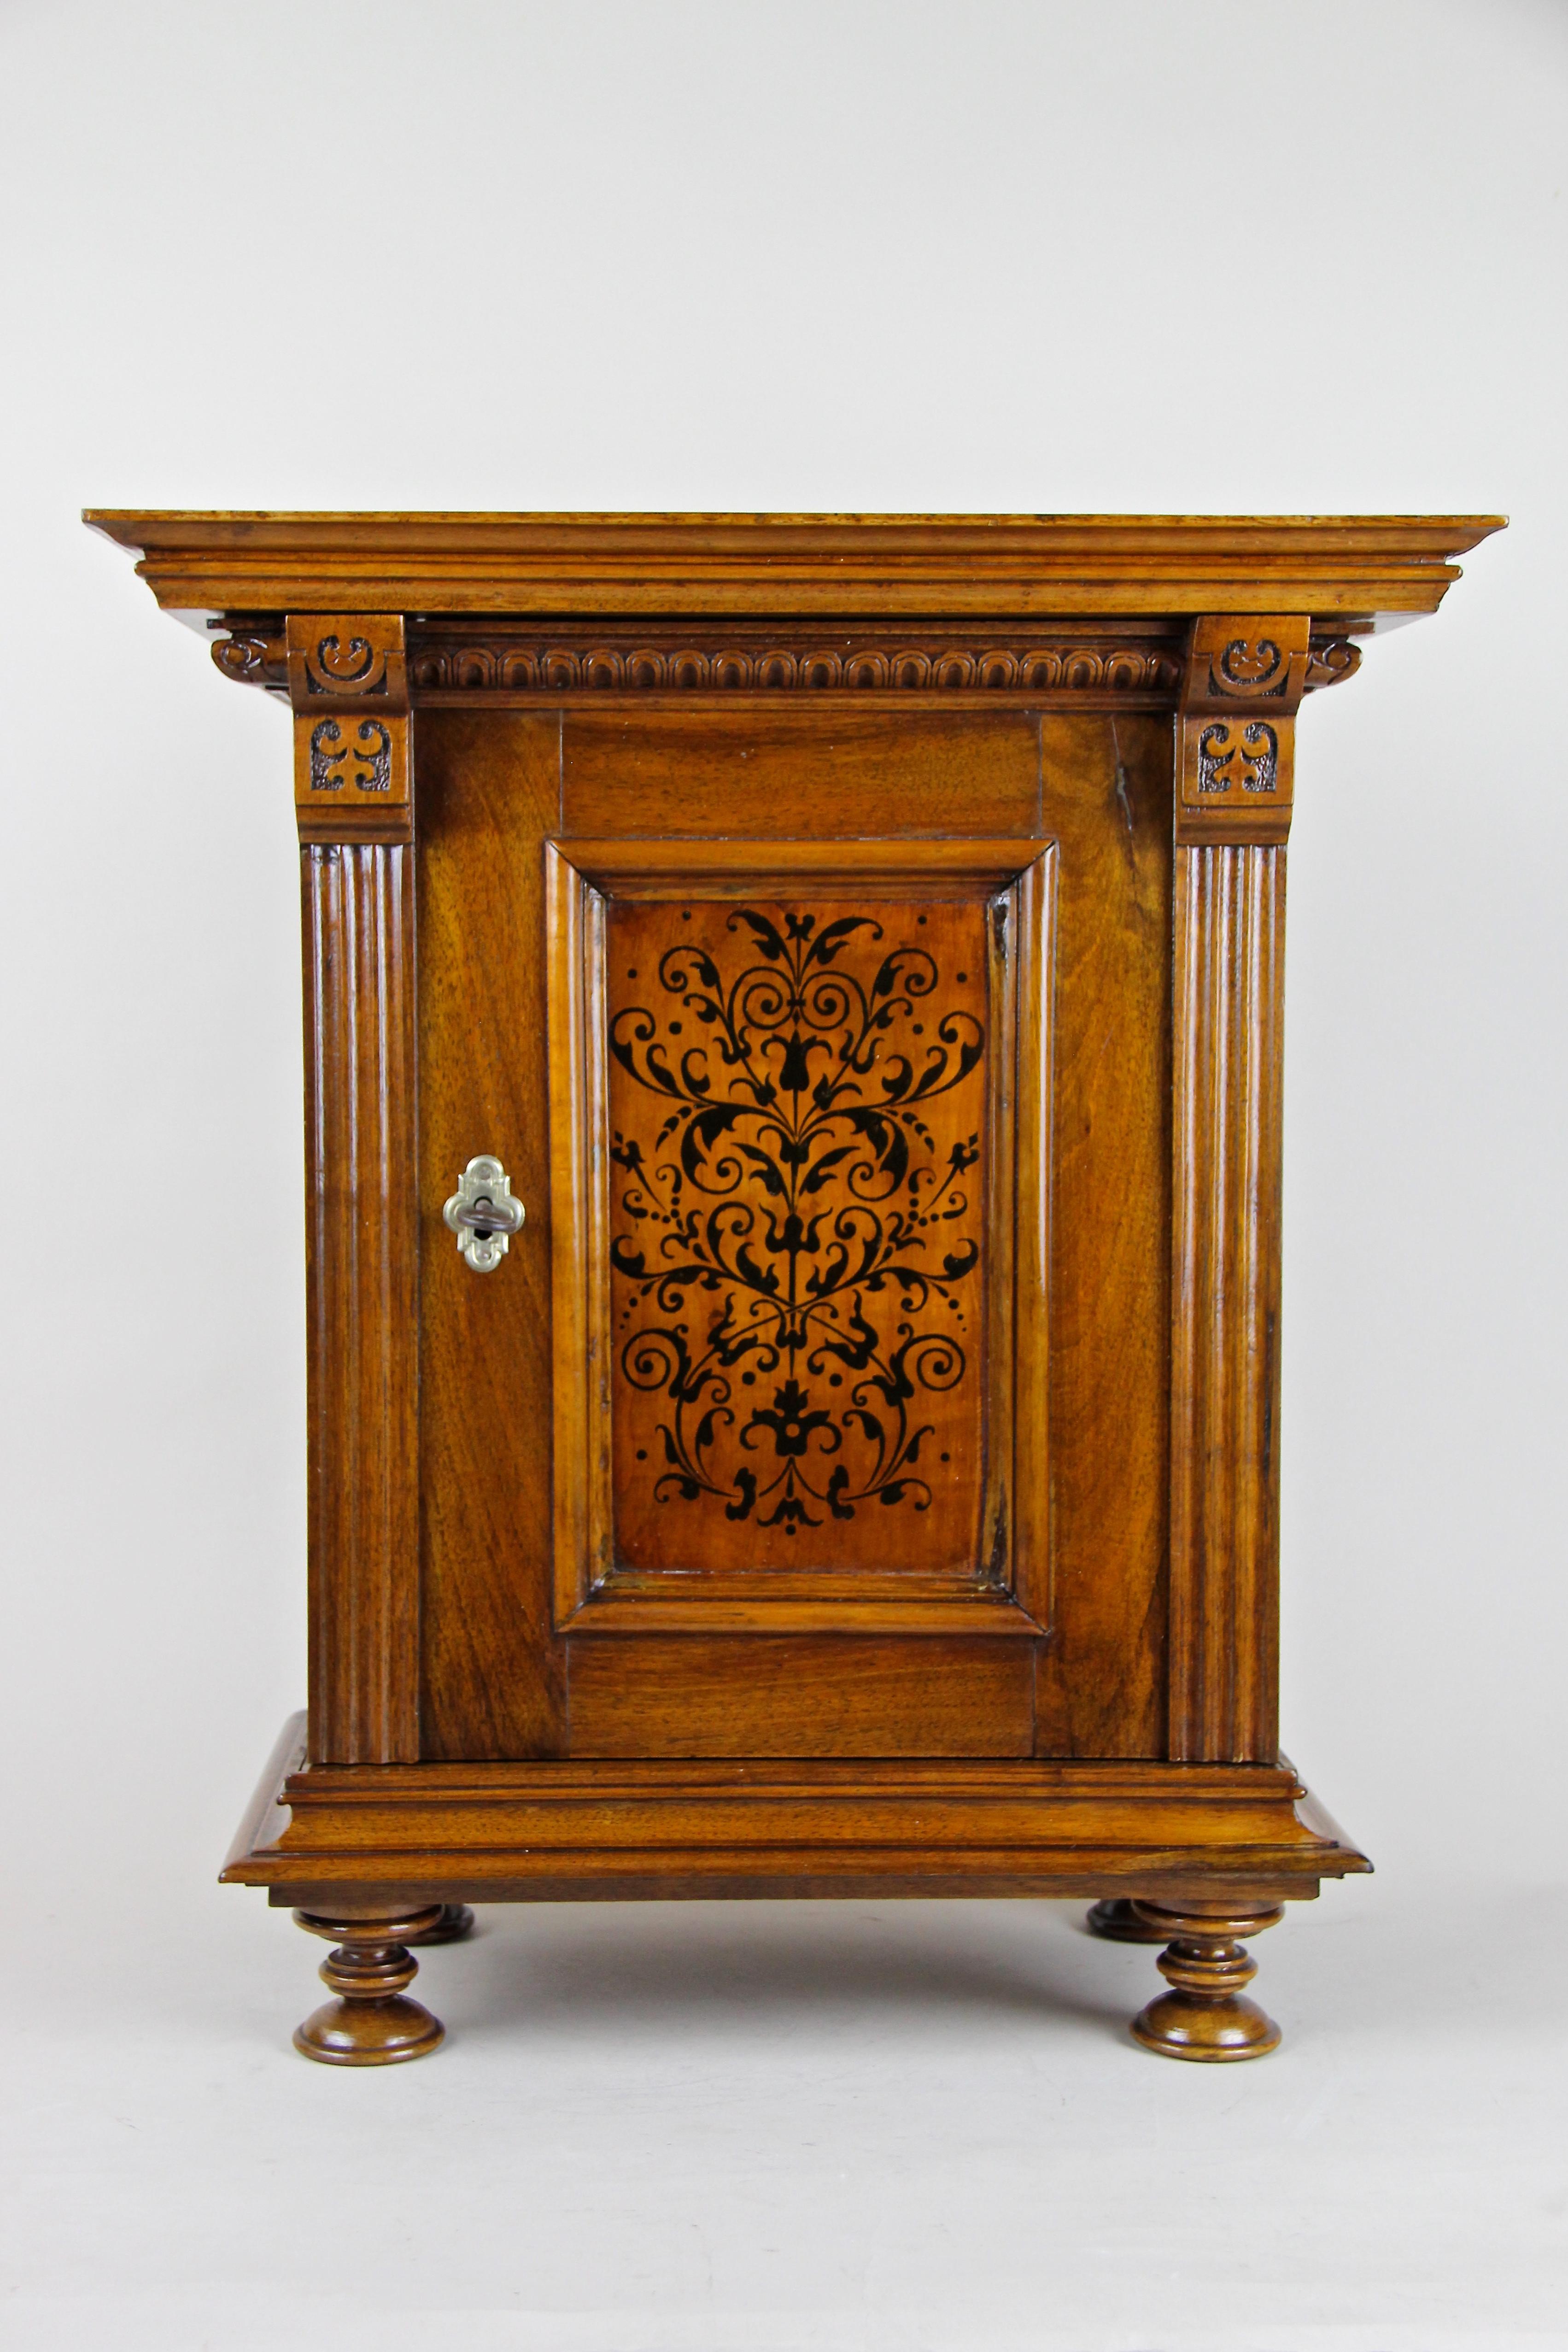 Marvelous Model Cabinet out of Austria circa 1880. This great miniature cabinet was made of spruce wood and veneered/ partly solid in fine nut wood. Pieces like this were made before it was produced in the 